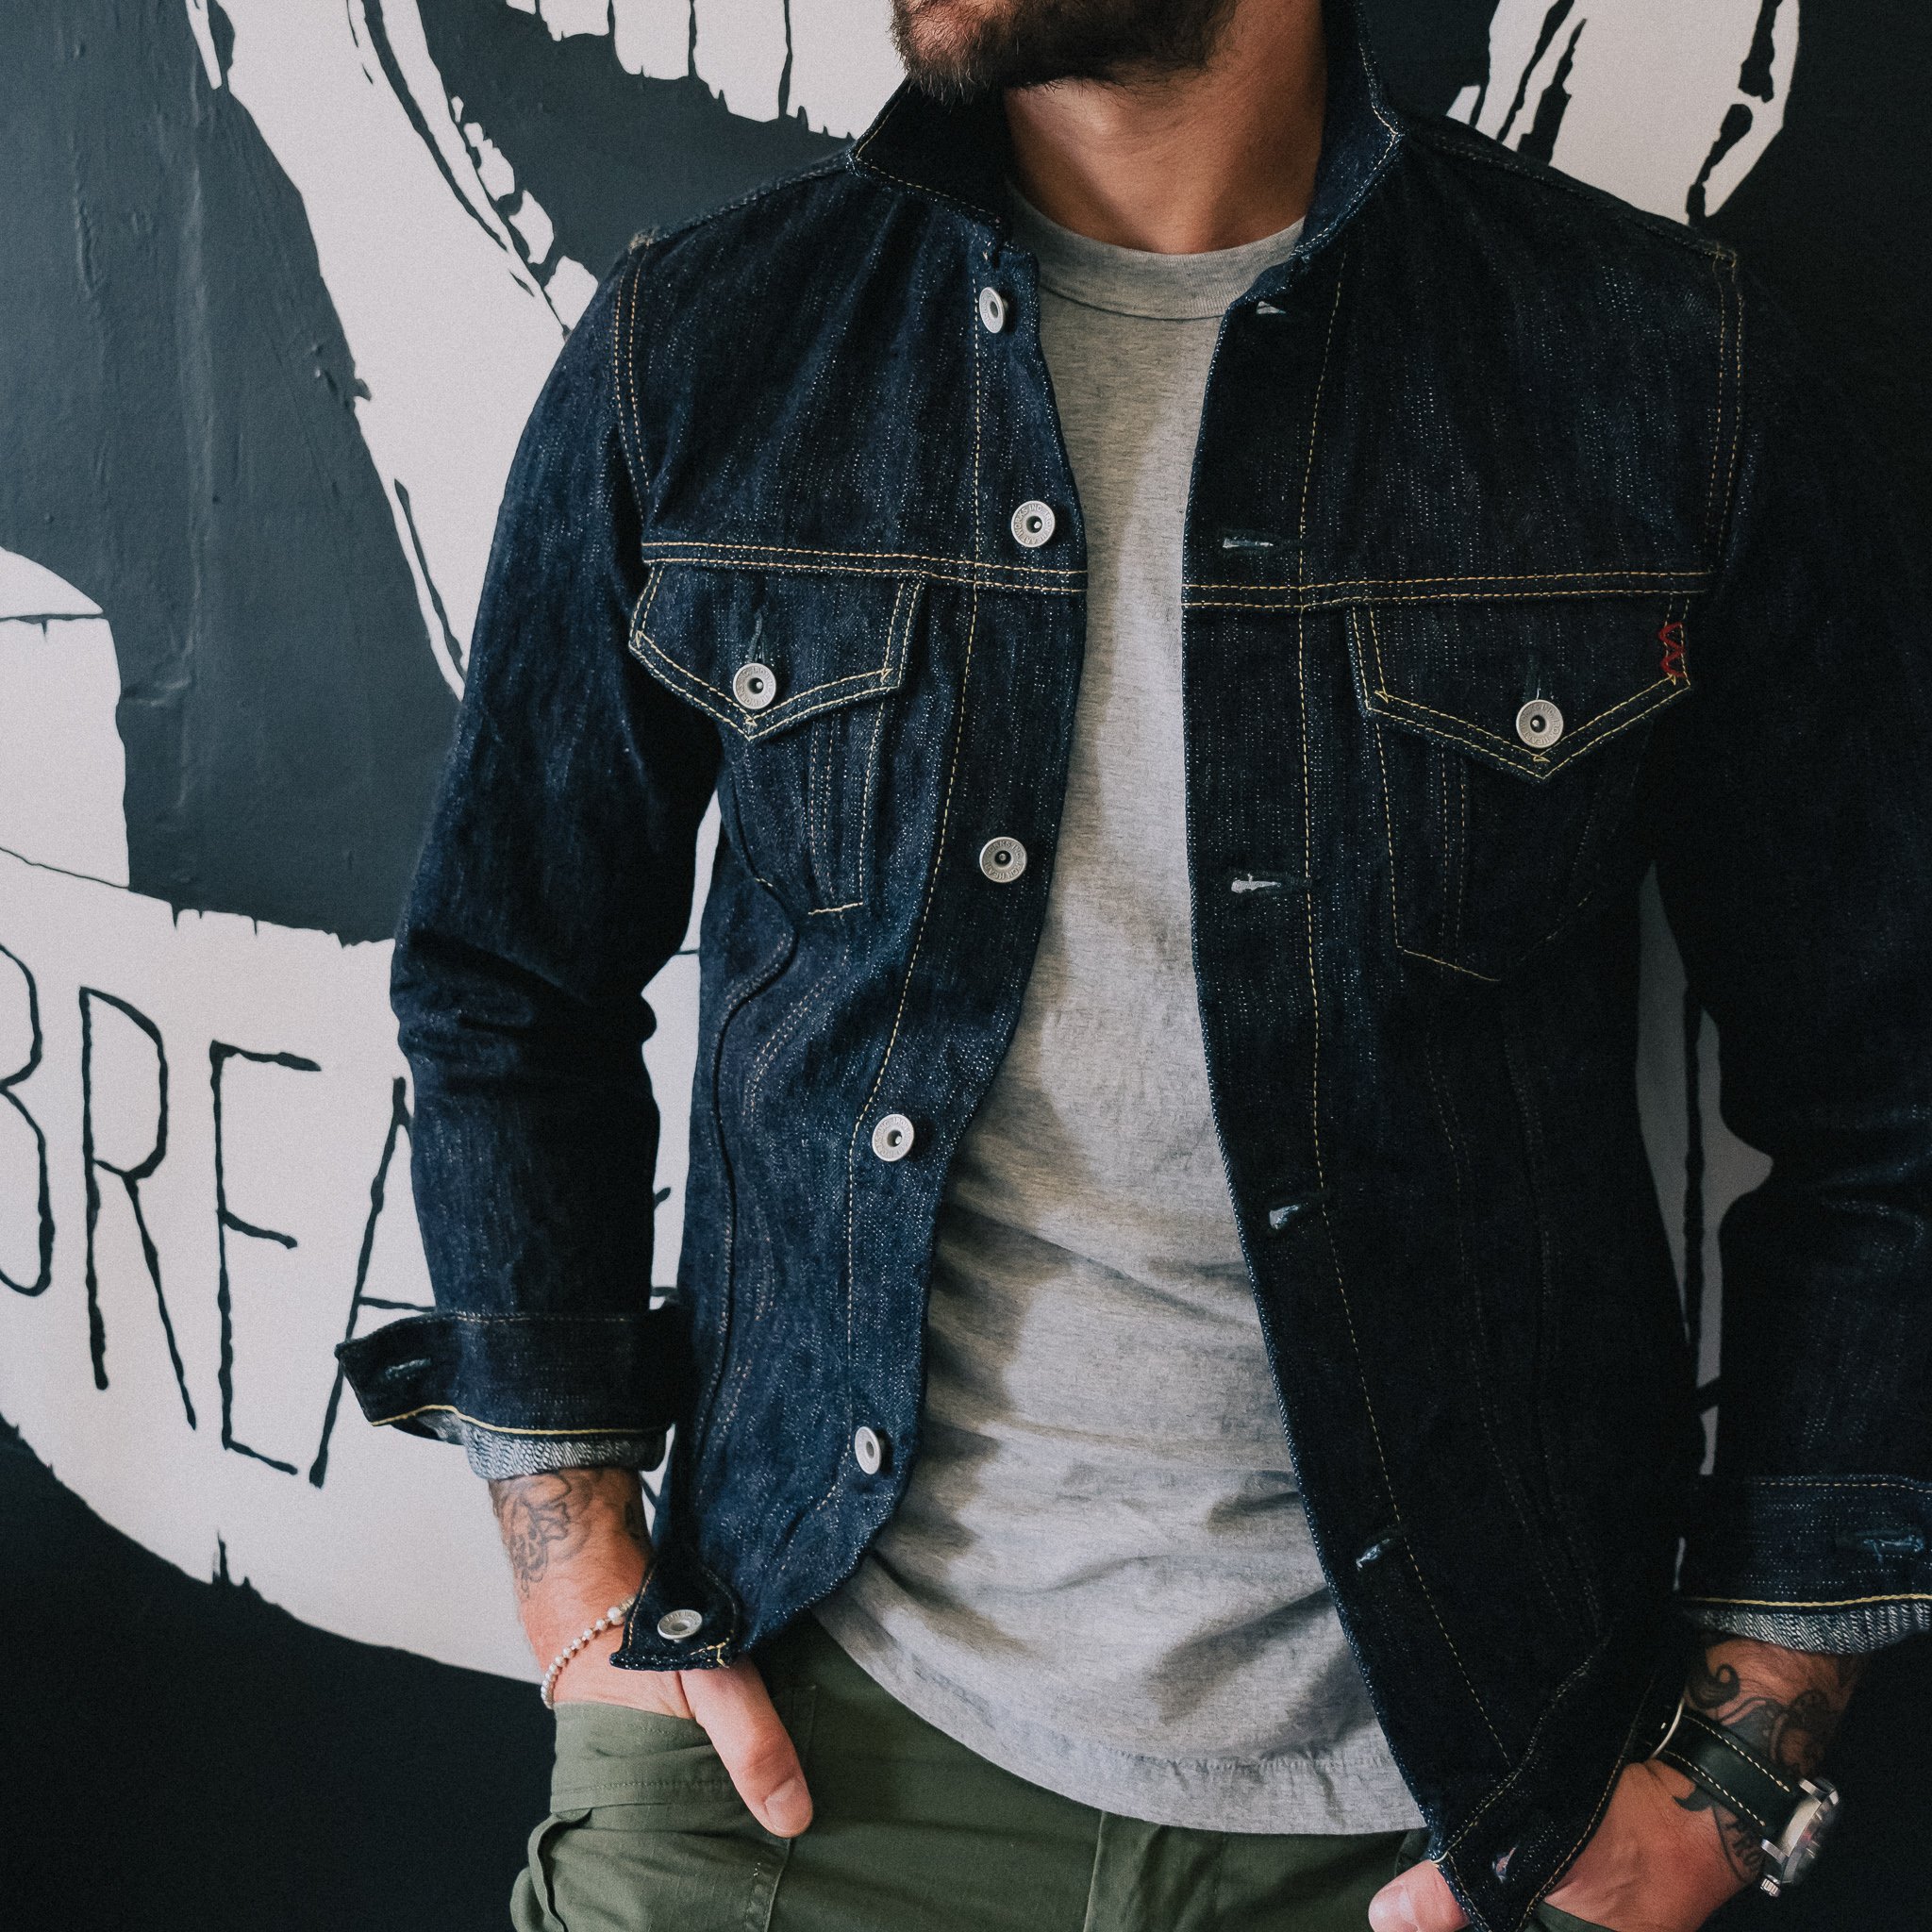 The Best Made-to-Fade Iron Heart Shirts and Jackets